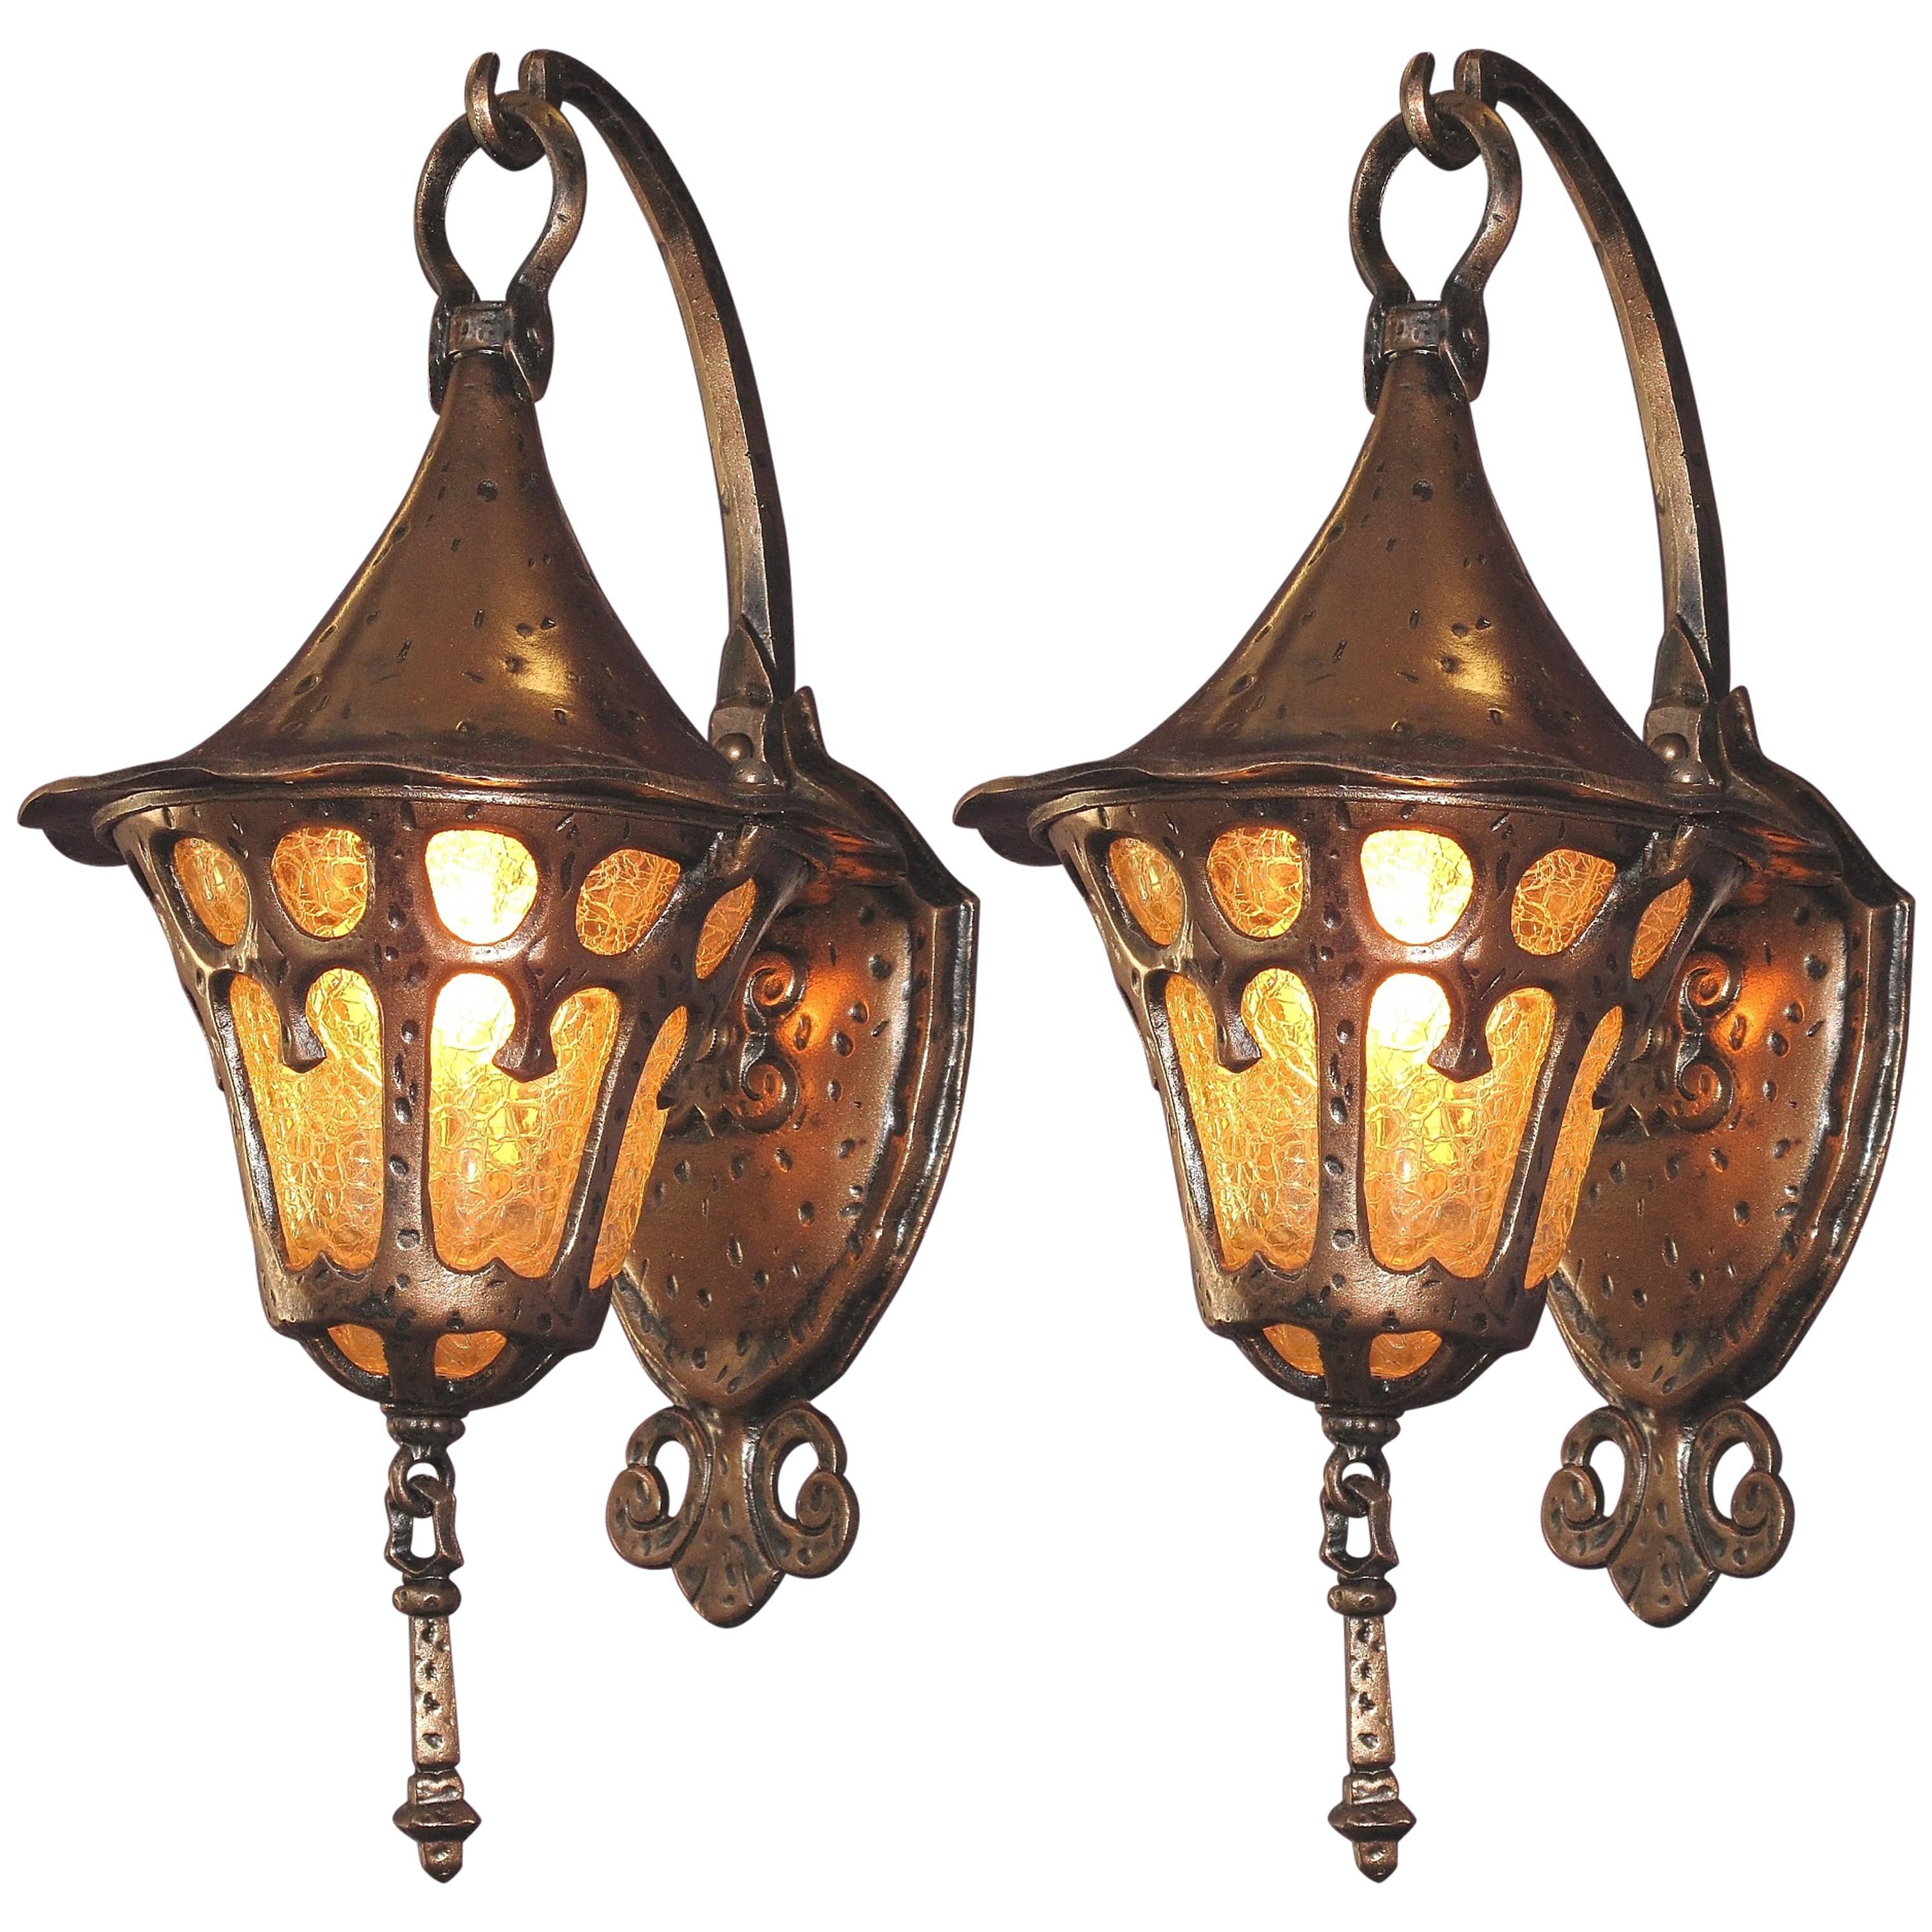 Pair of 1920s Storybook Porch Lights